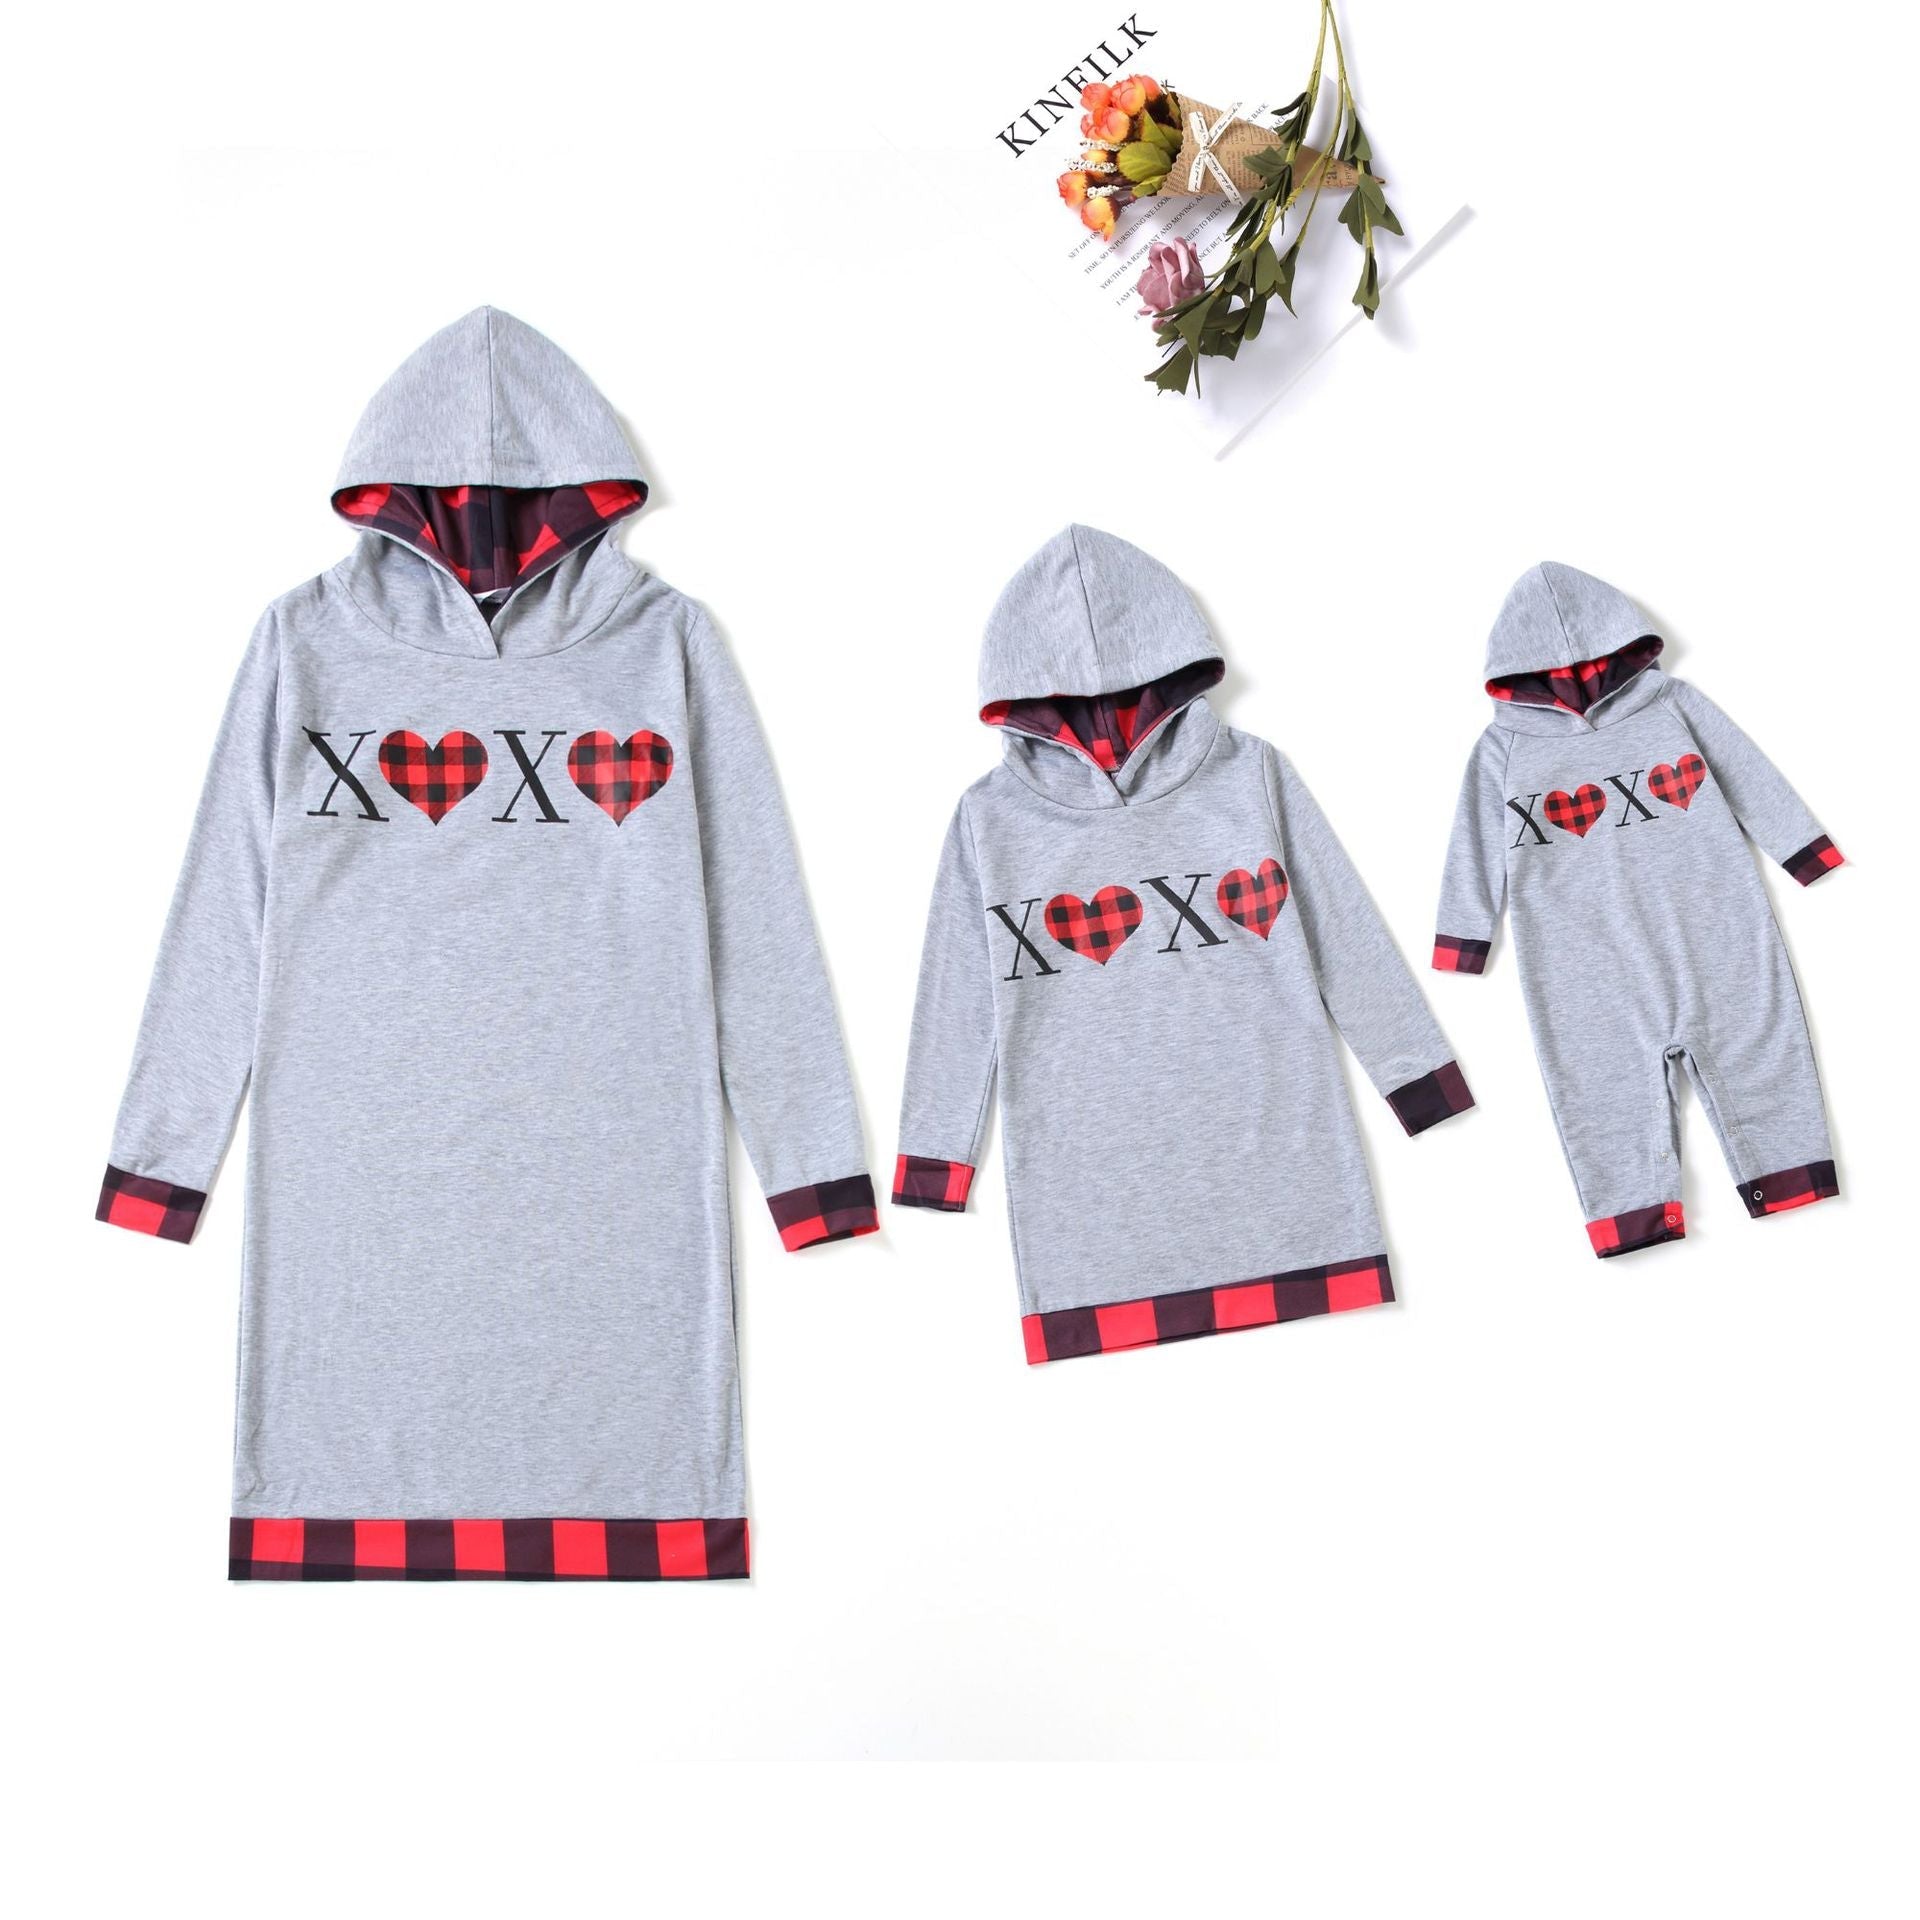 Contrast Plaid Print Long-sleeve Hoodie Dress for Mom and Me